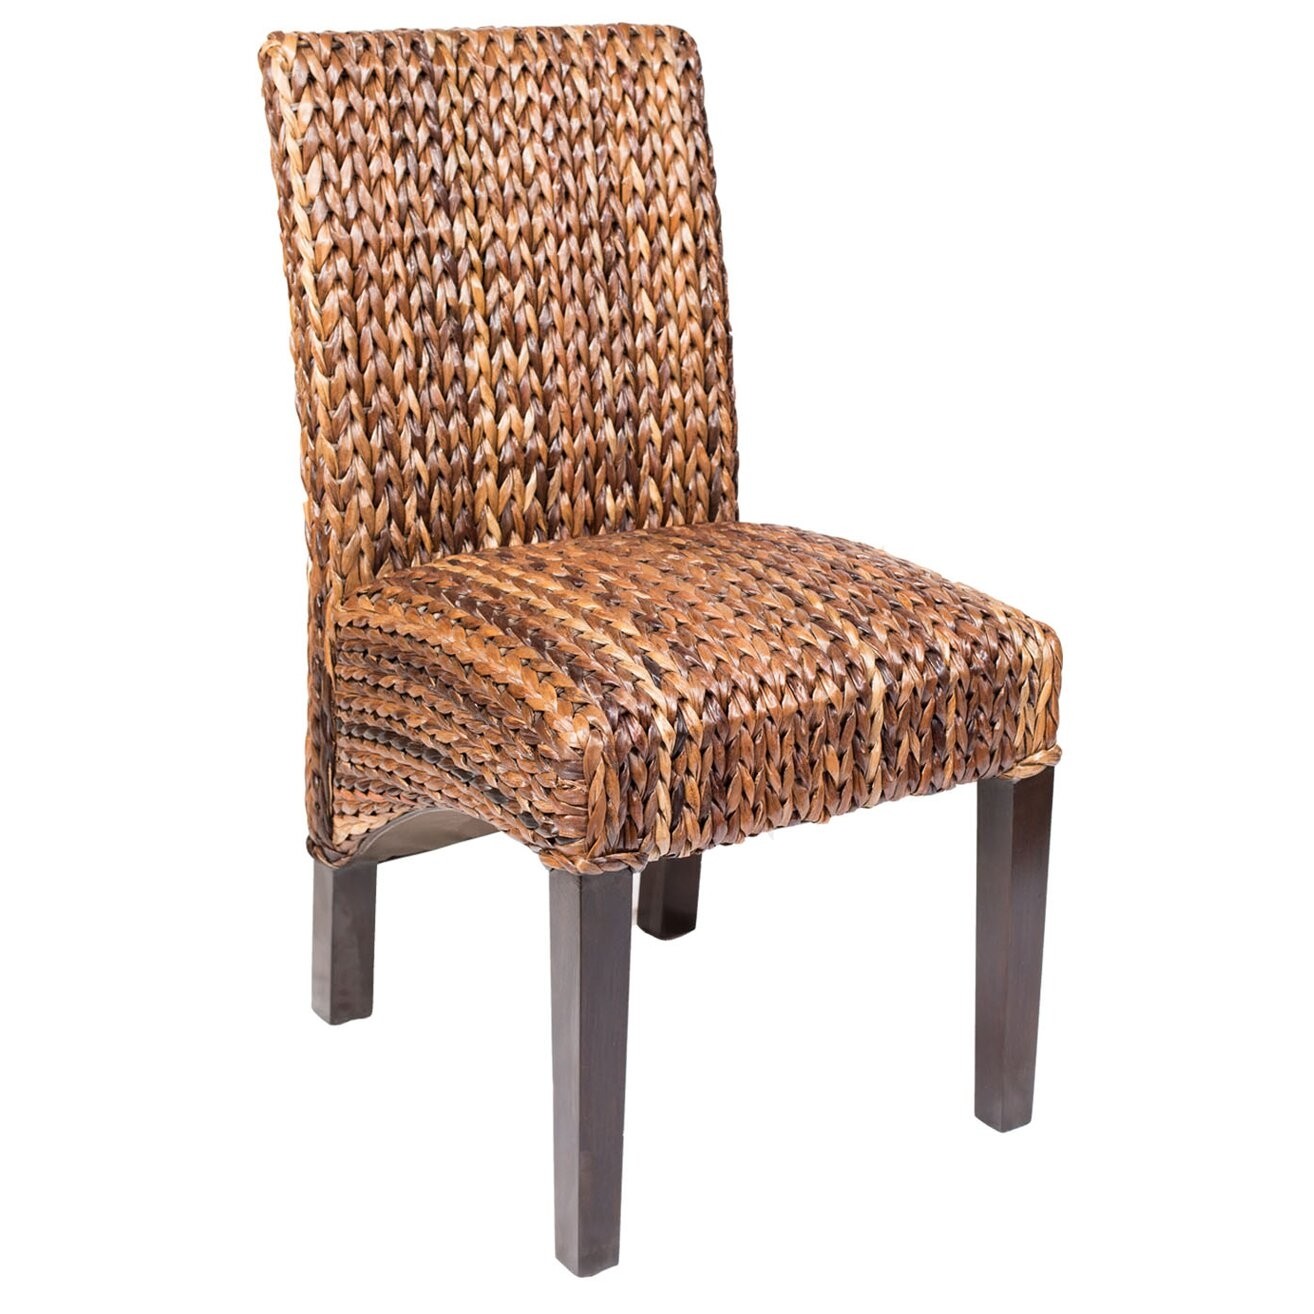 Seagrass Side Chair (Set of 2)